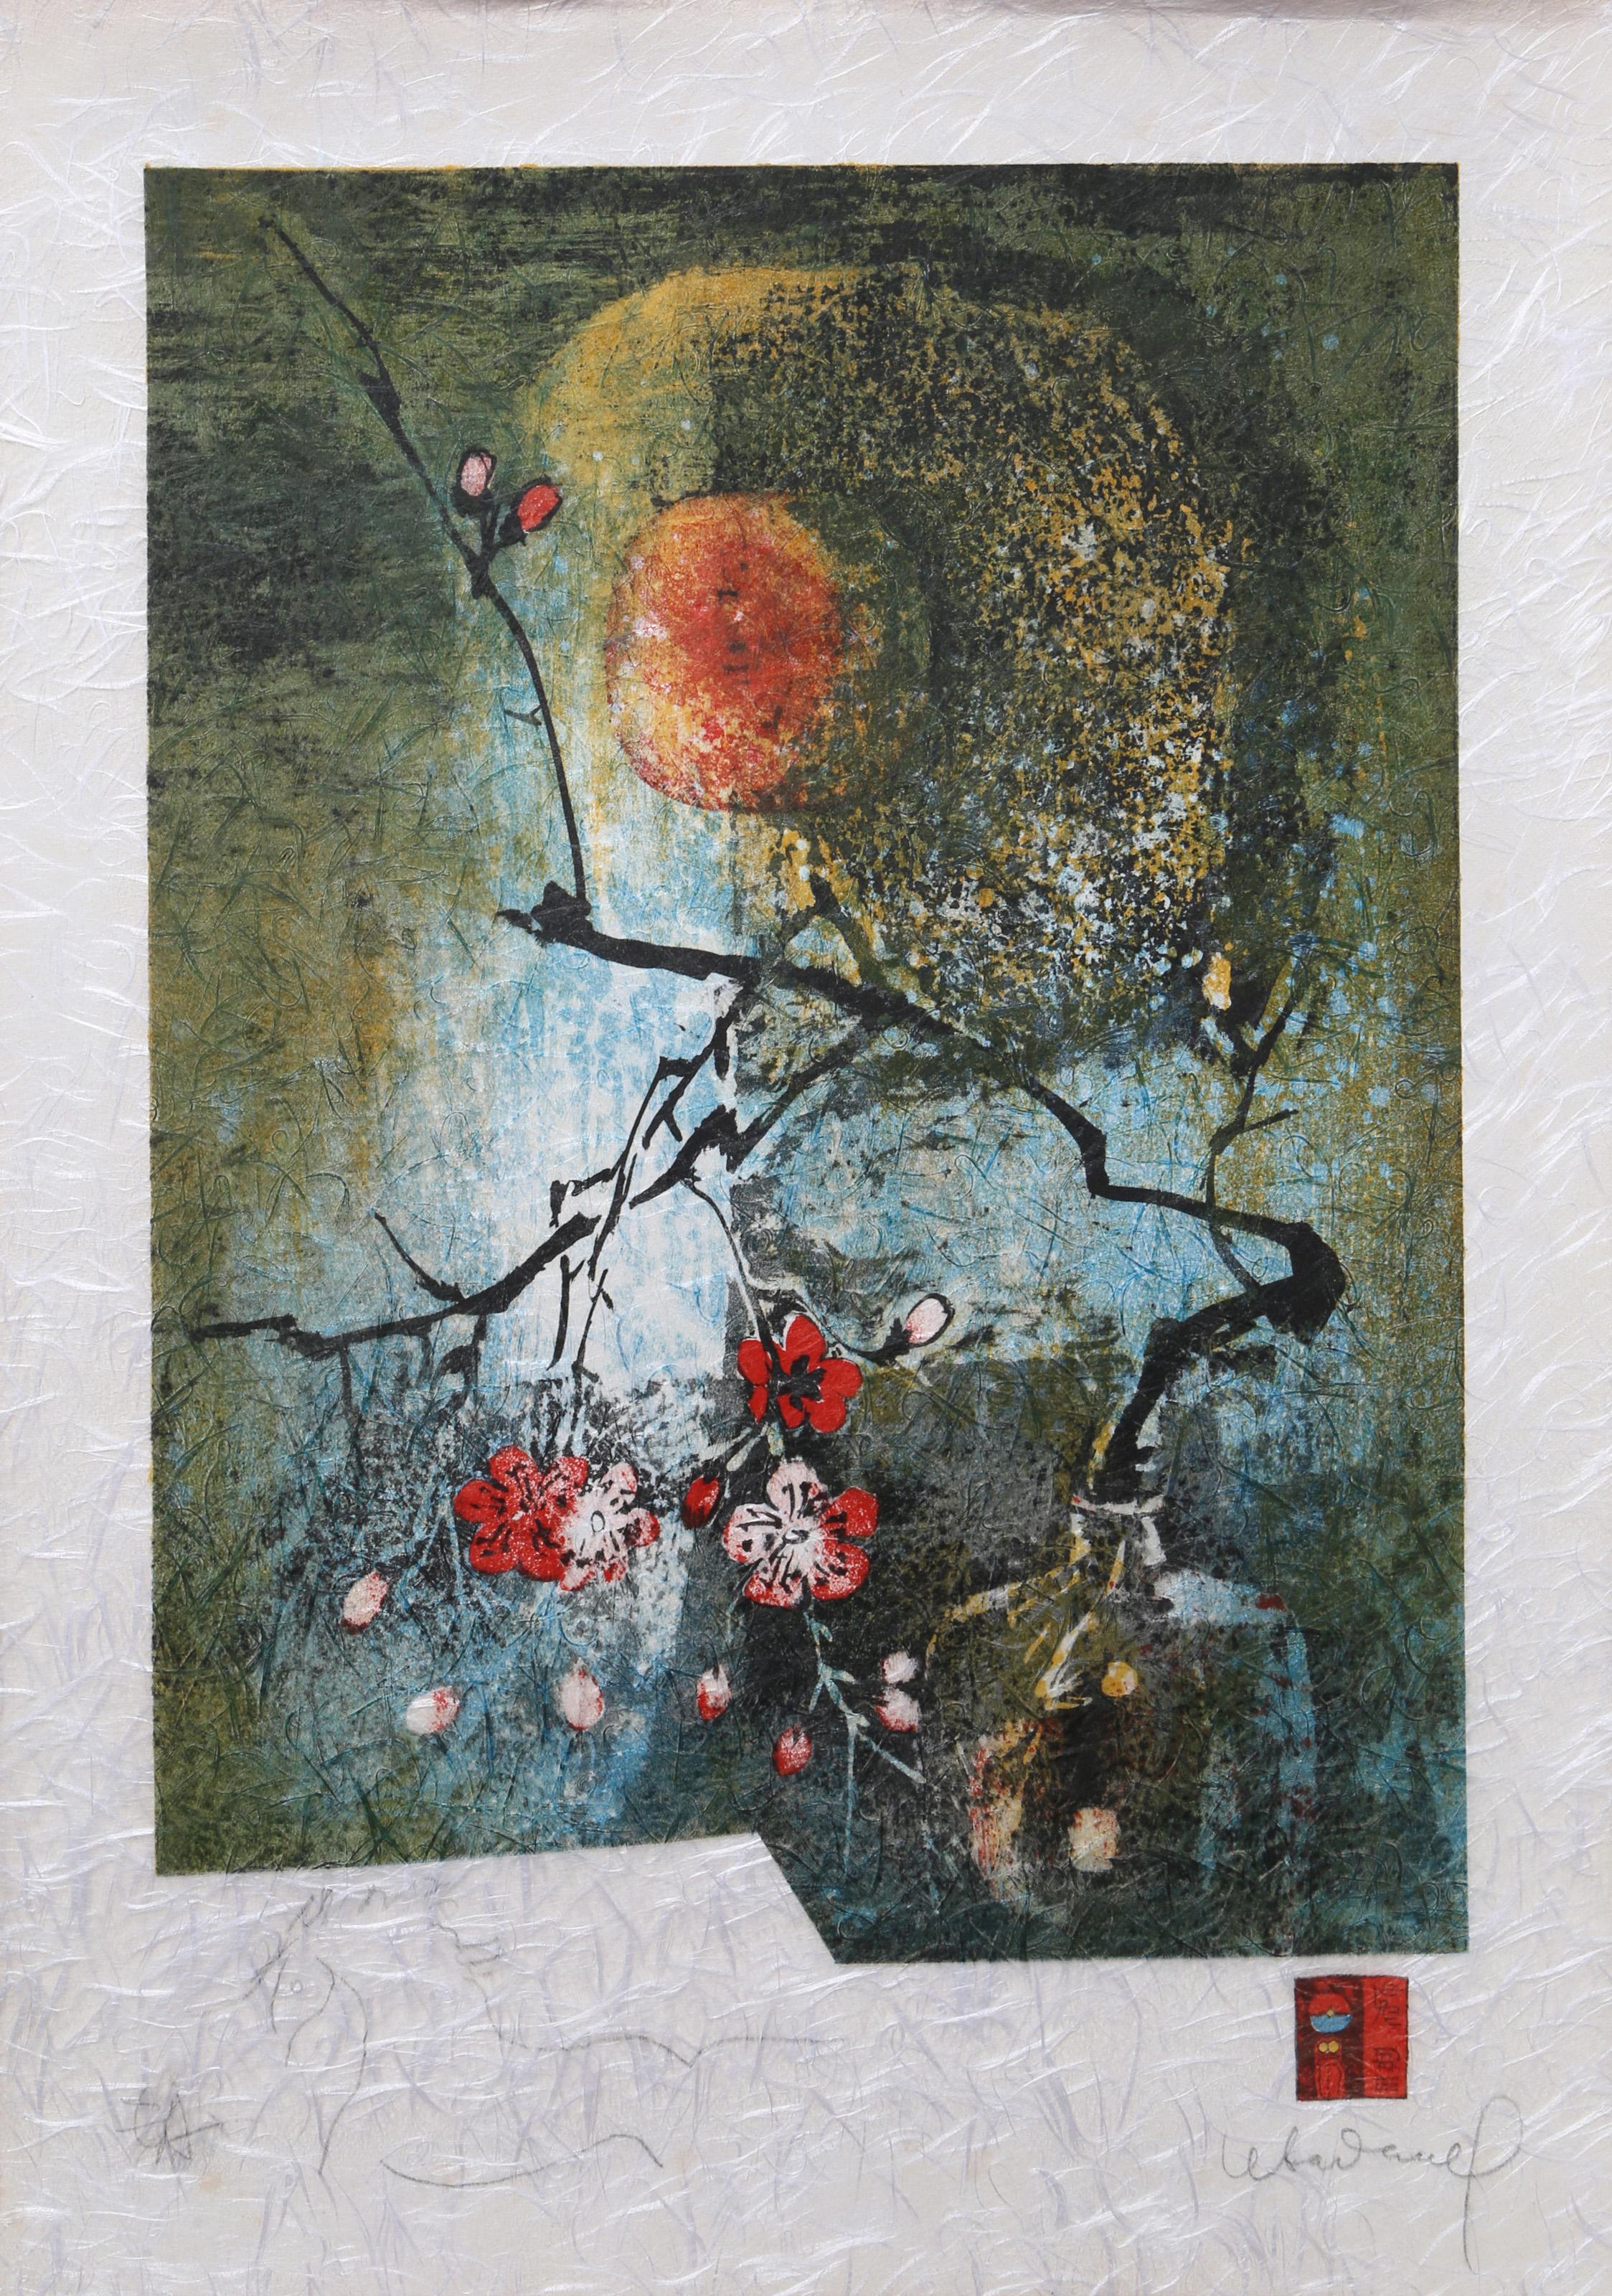 Lebadang (aka Hoi), Vietnamese (1922 - 2015) -  Cherry Blossoms. Year: circa 1970, Medium: Lithograph on Handmade paper, signed in pencil, Edition: EA, Size: 29 x 21 in. (73.66 x 53.34 cm) 